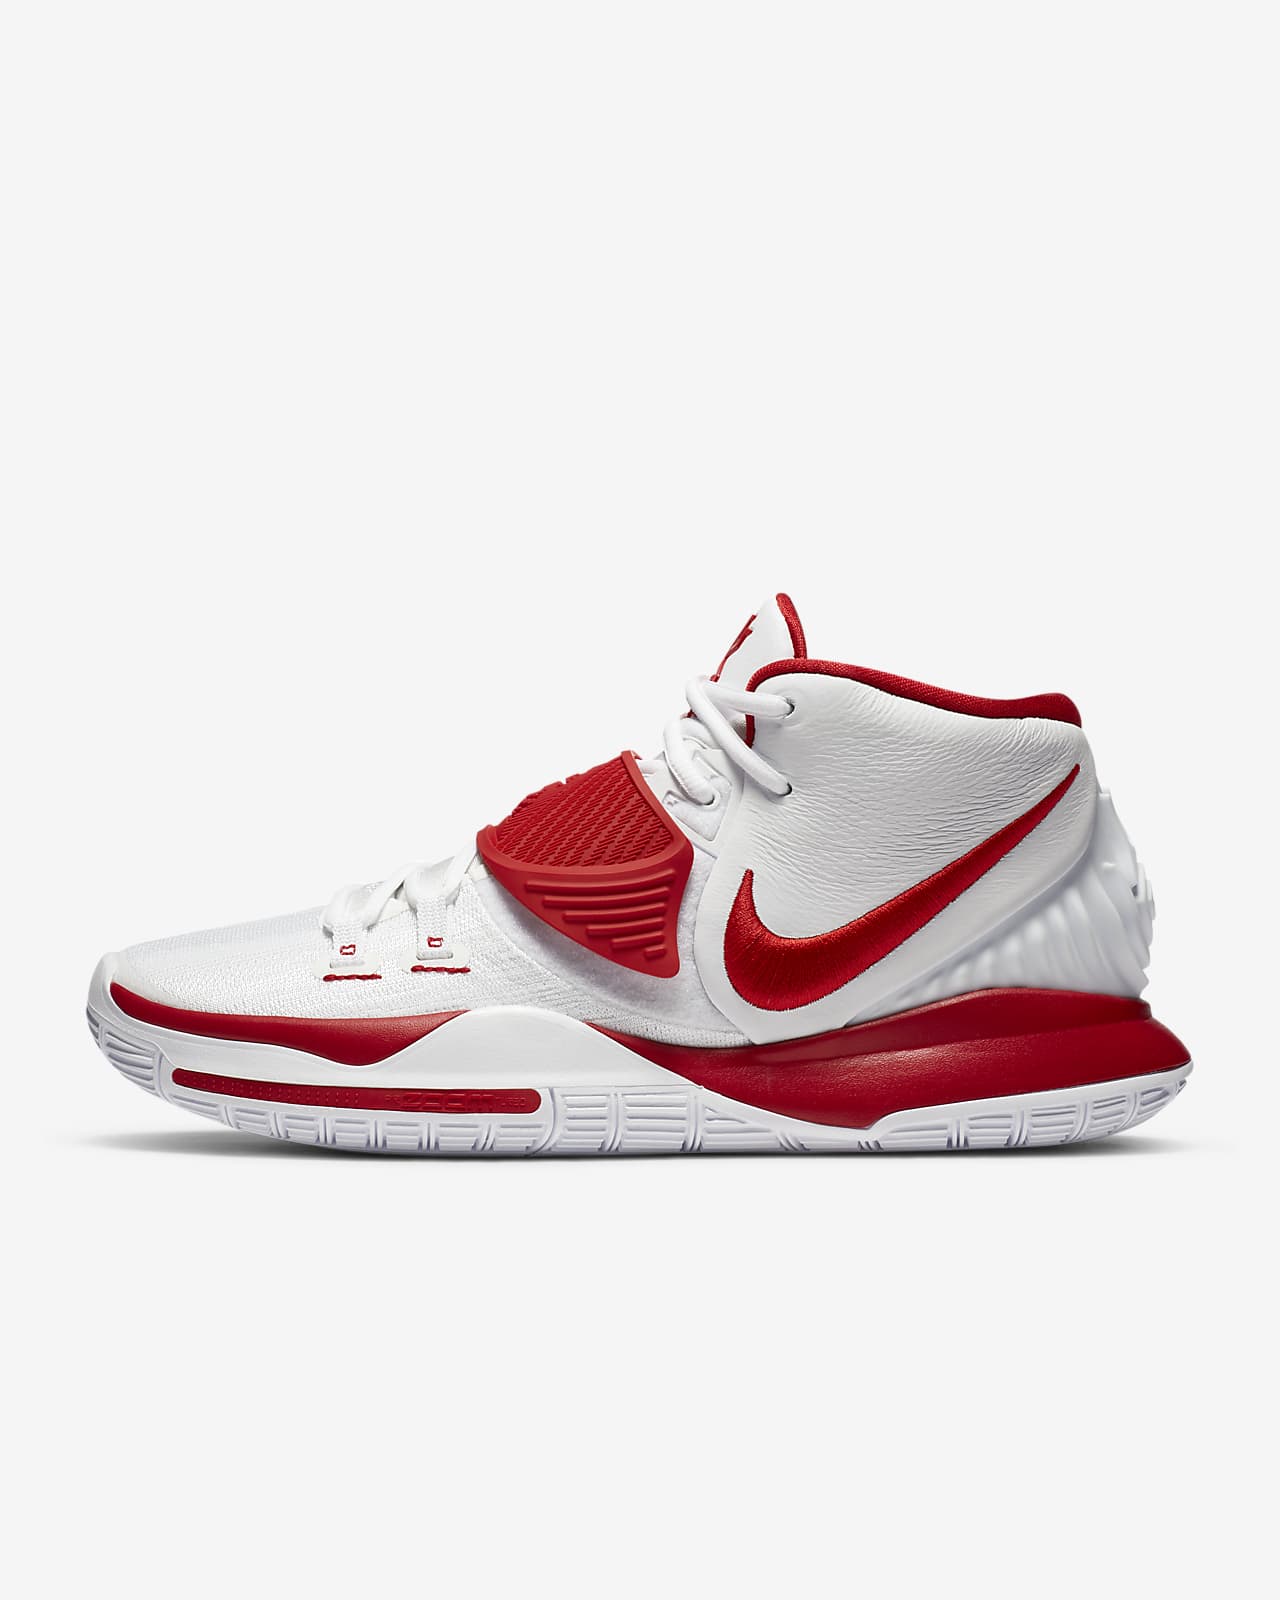 kyrie 5 team shoes